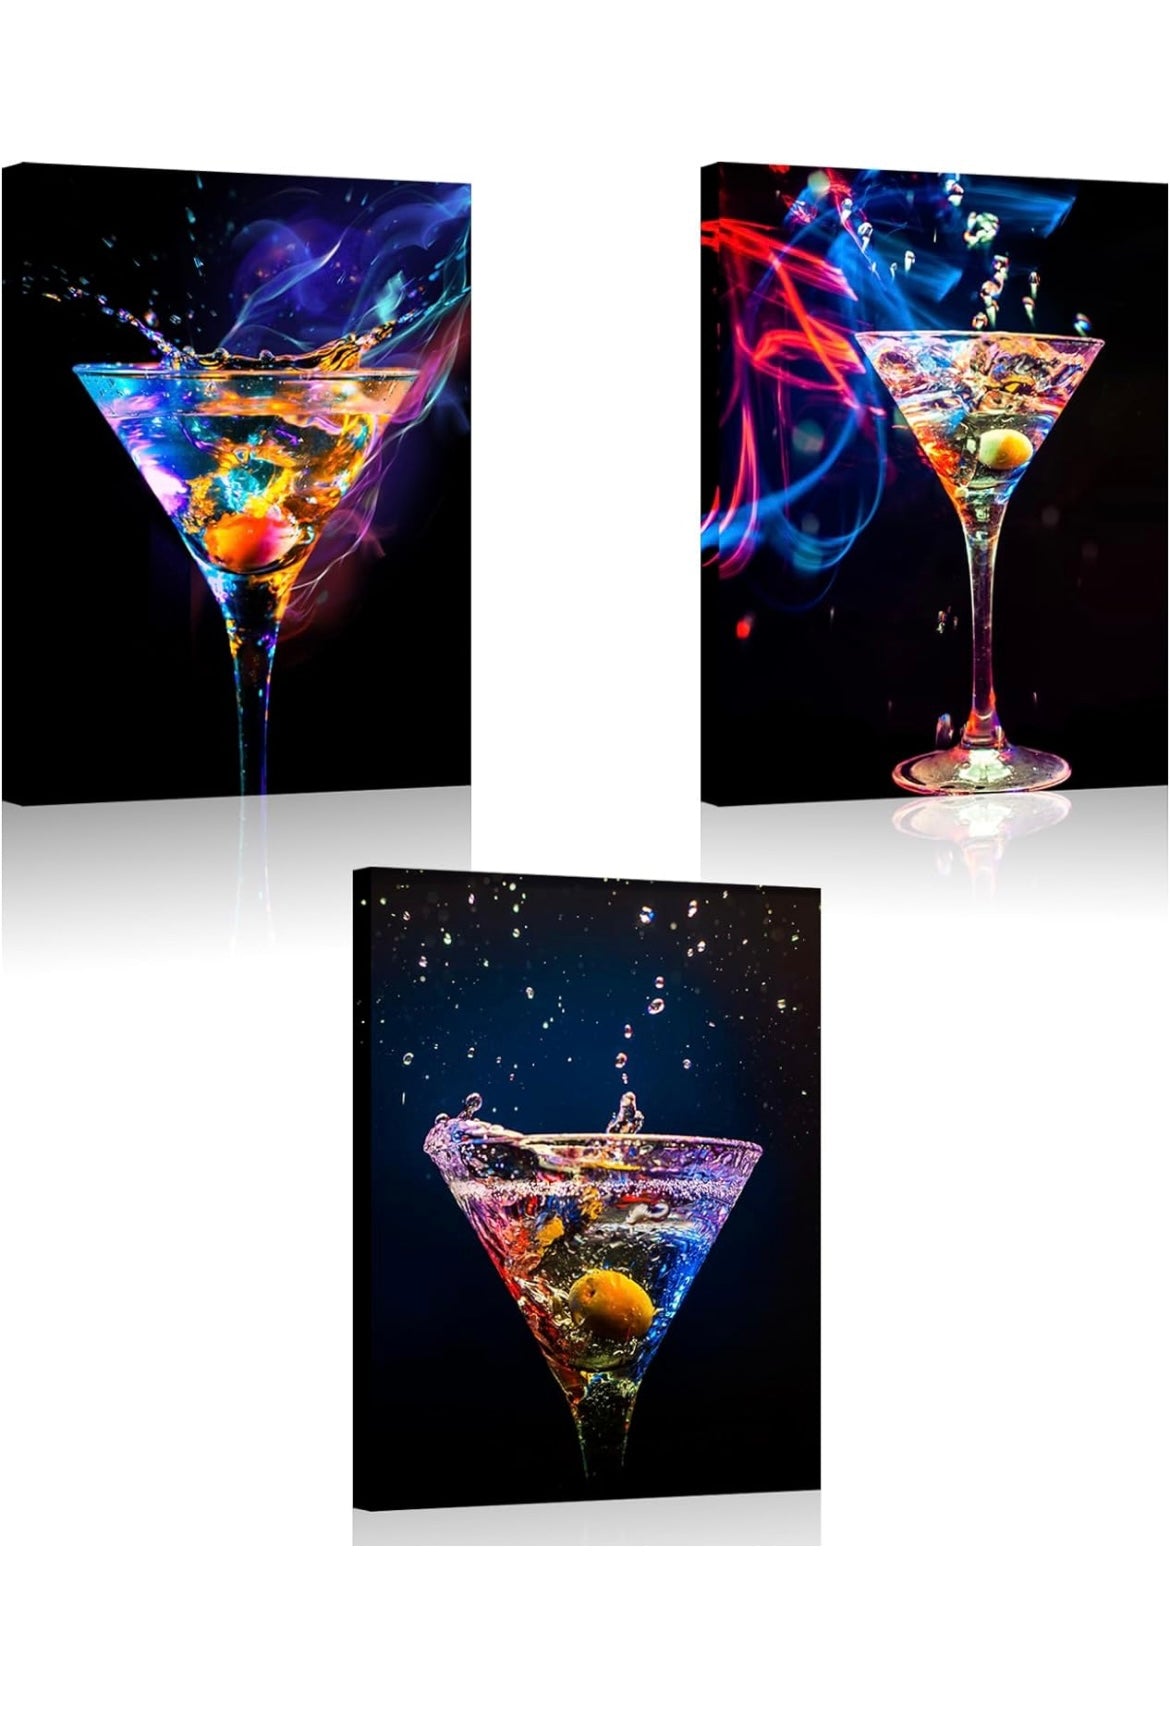 Biuteawal - 3 Piece Wall Art Colorful Sparkling Wine Pictures Painting on Canvas Wine Drinks Art Print for Party Decoration Modern Bar Pub Home Dining Room Wall Decor